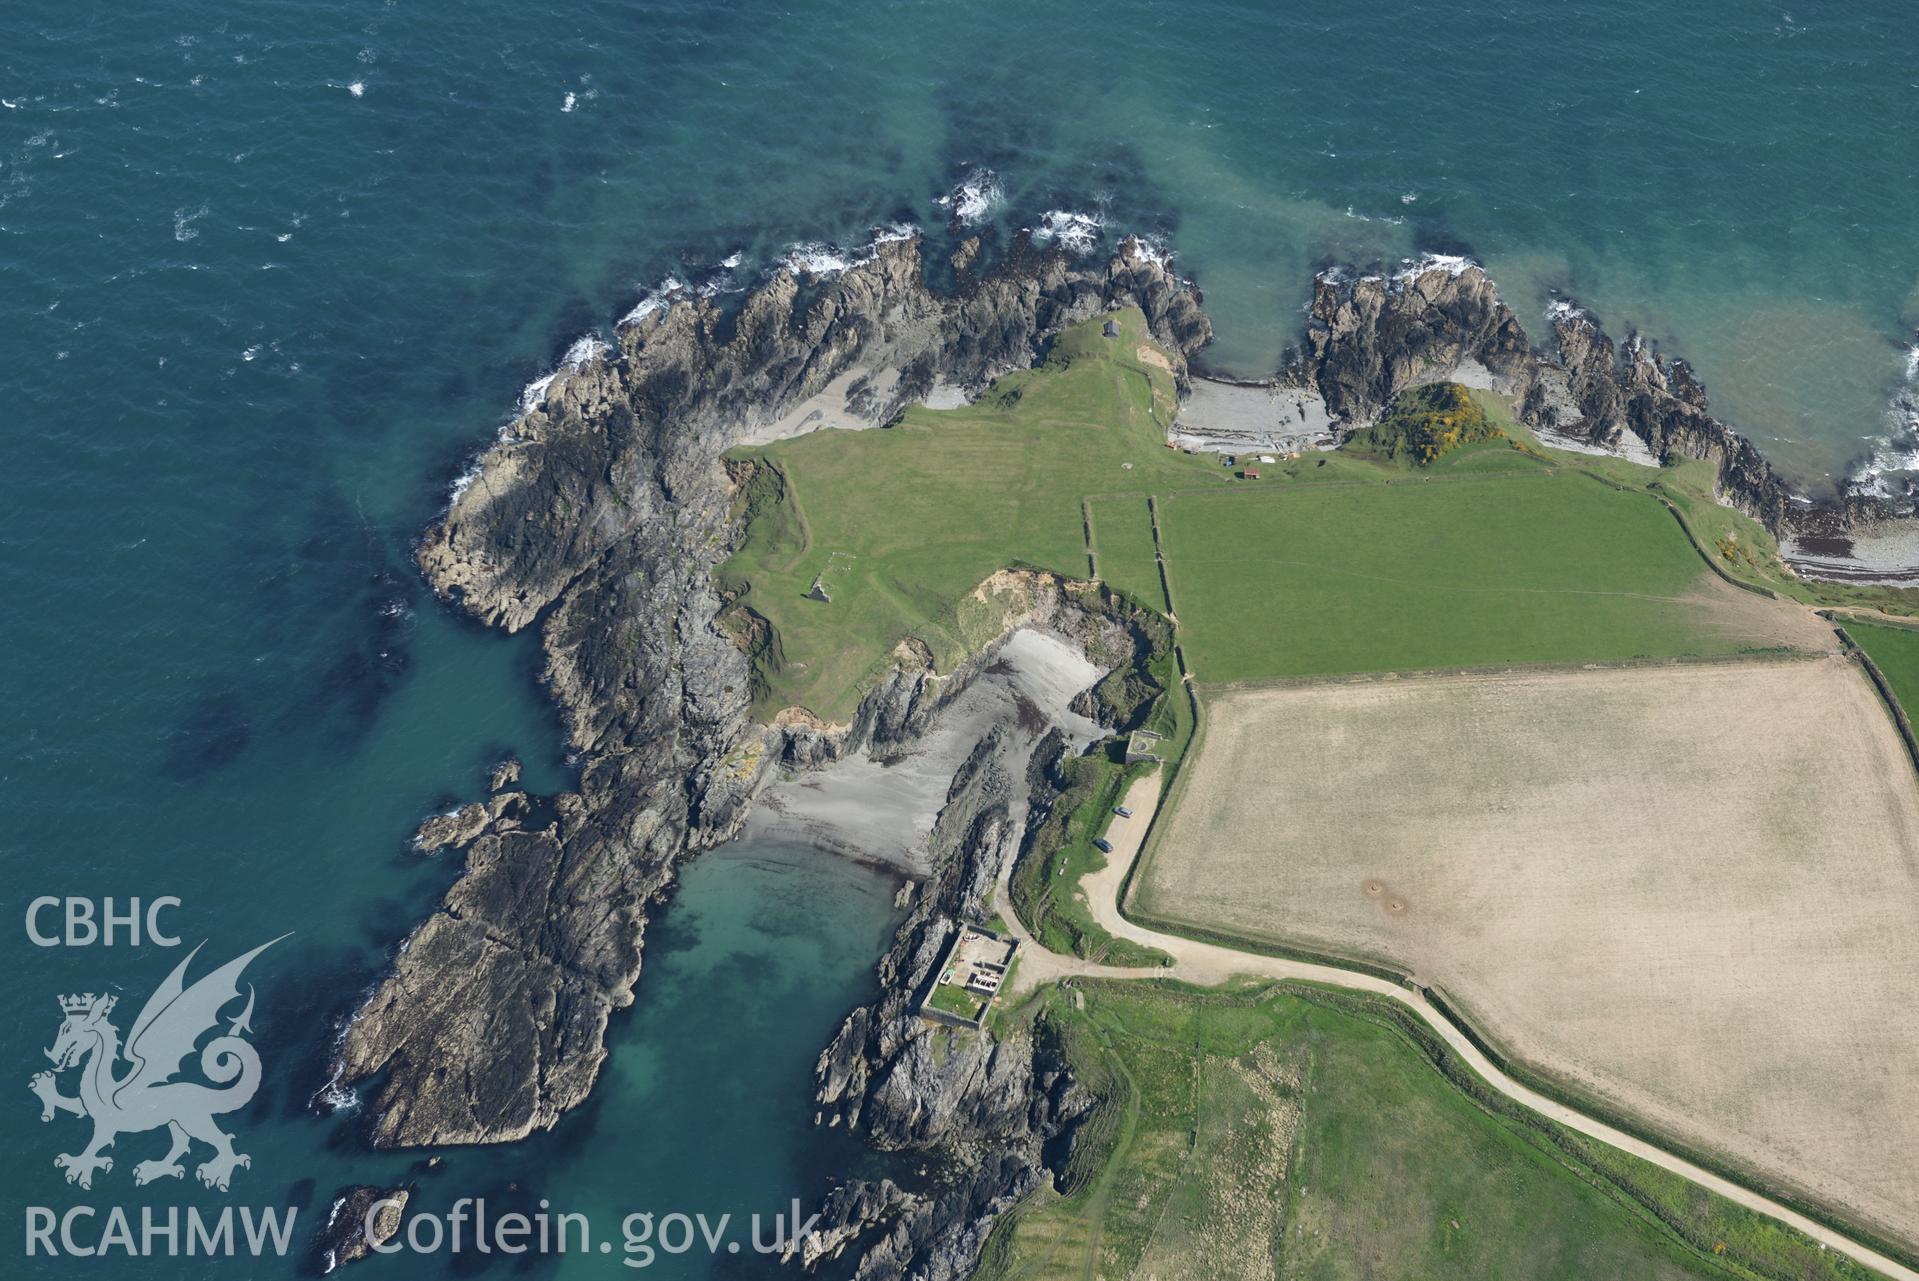 Aerial photography of Porth Ysgaden taken on 3rd May 2017.  Baseline aerial reconnaissance survey for the CHERISH Project. ? Crown: CHERISH PROJECT 2017. Produced with EU funds through the Ireland Wales Co-operation Programme 2014-2020. All material made